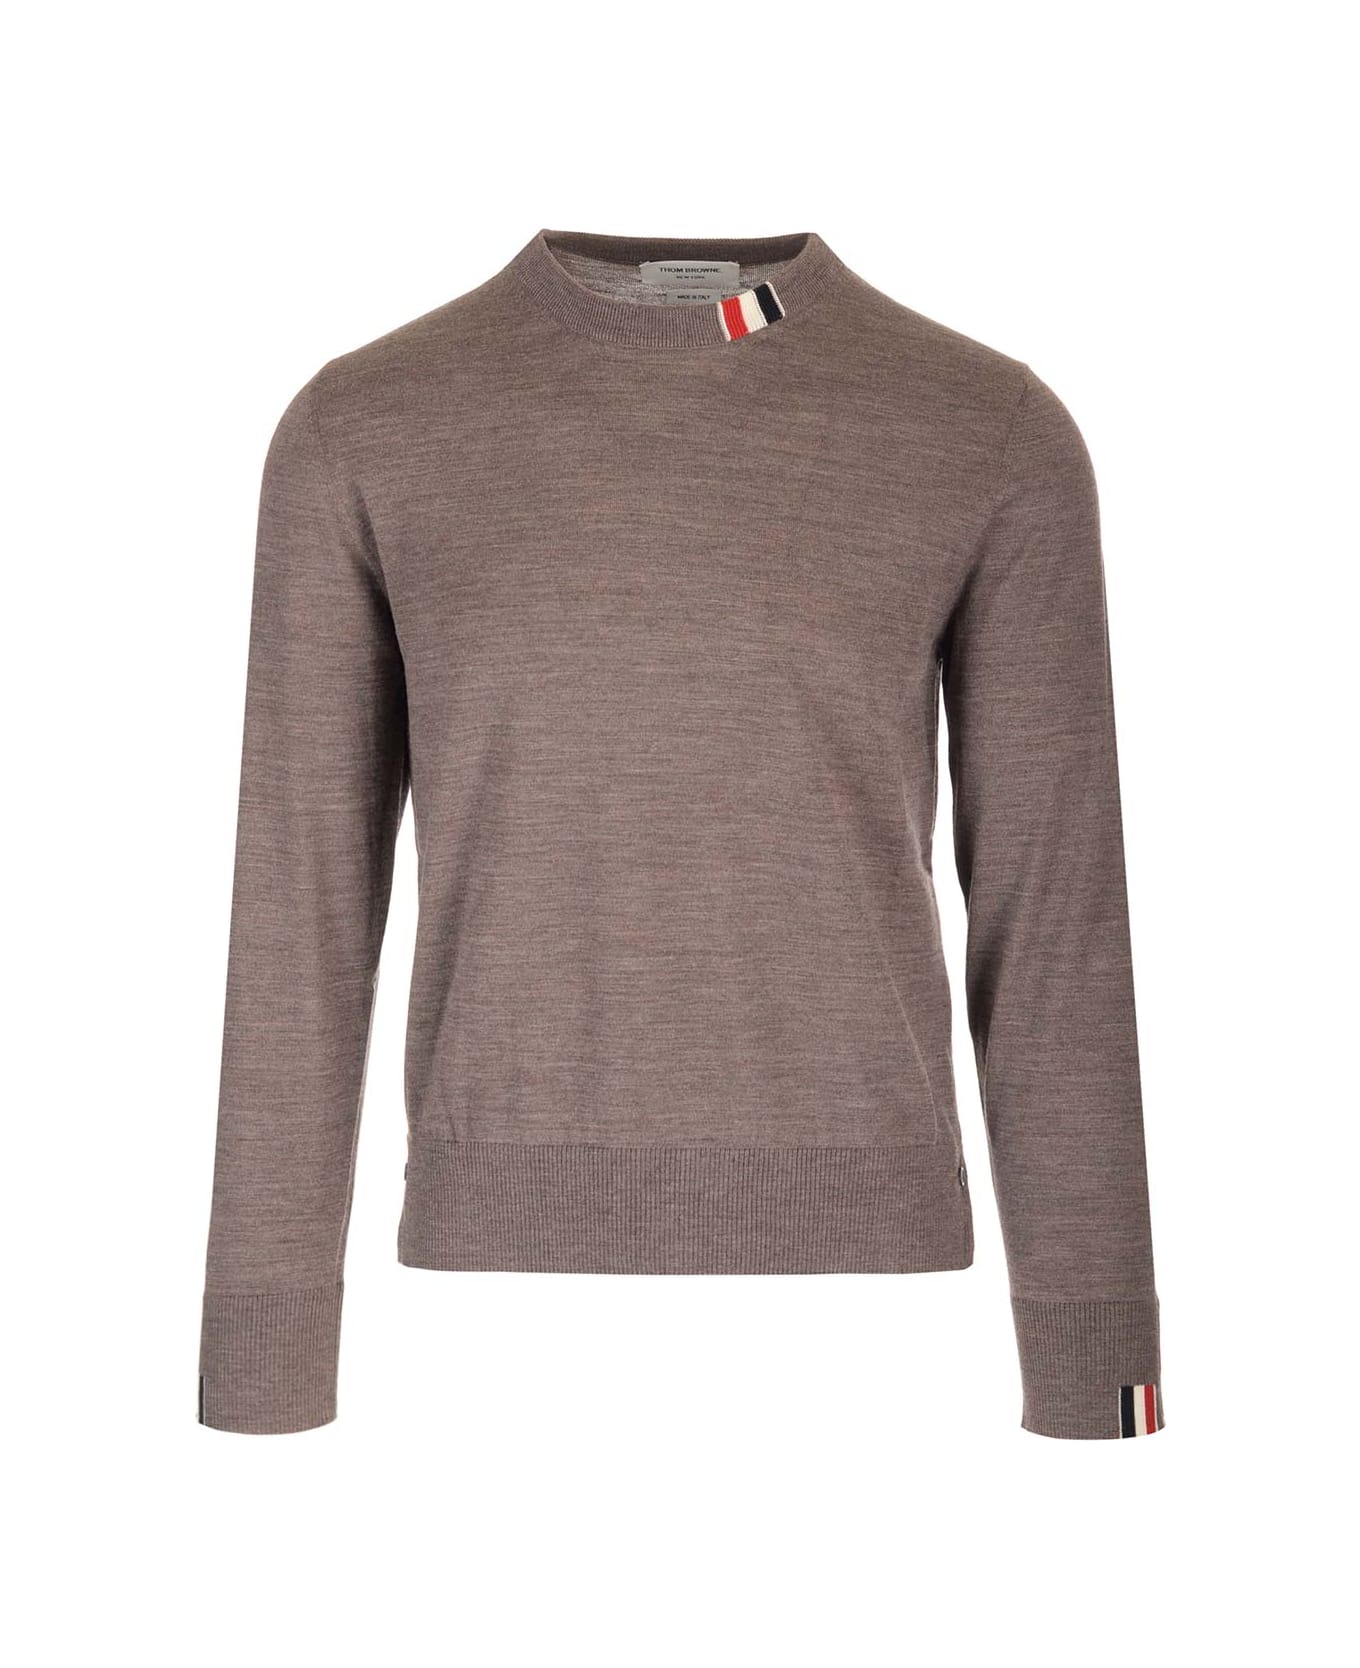 Thom Browne Relaxed-fit Crew Neck Pullover - brown ニットウェア